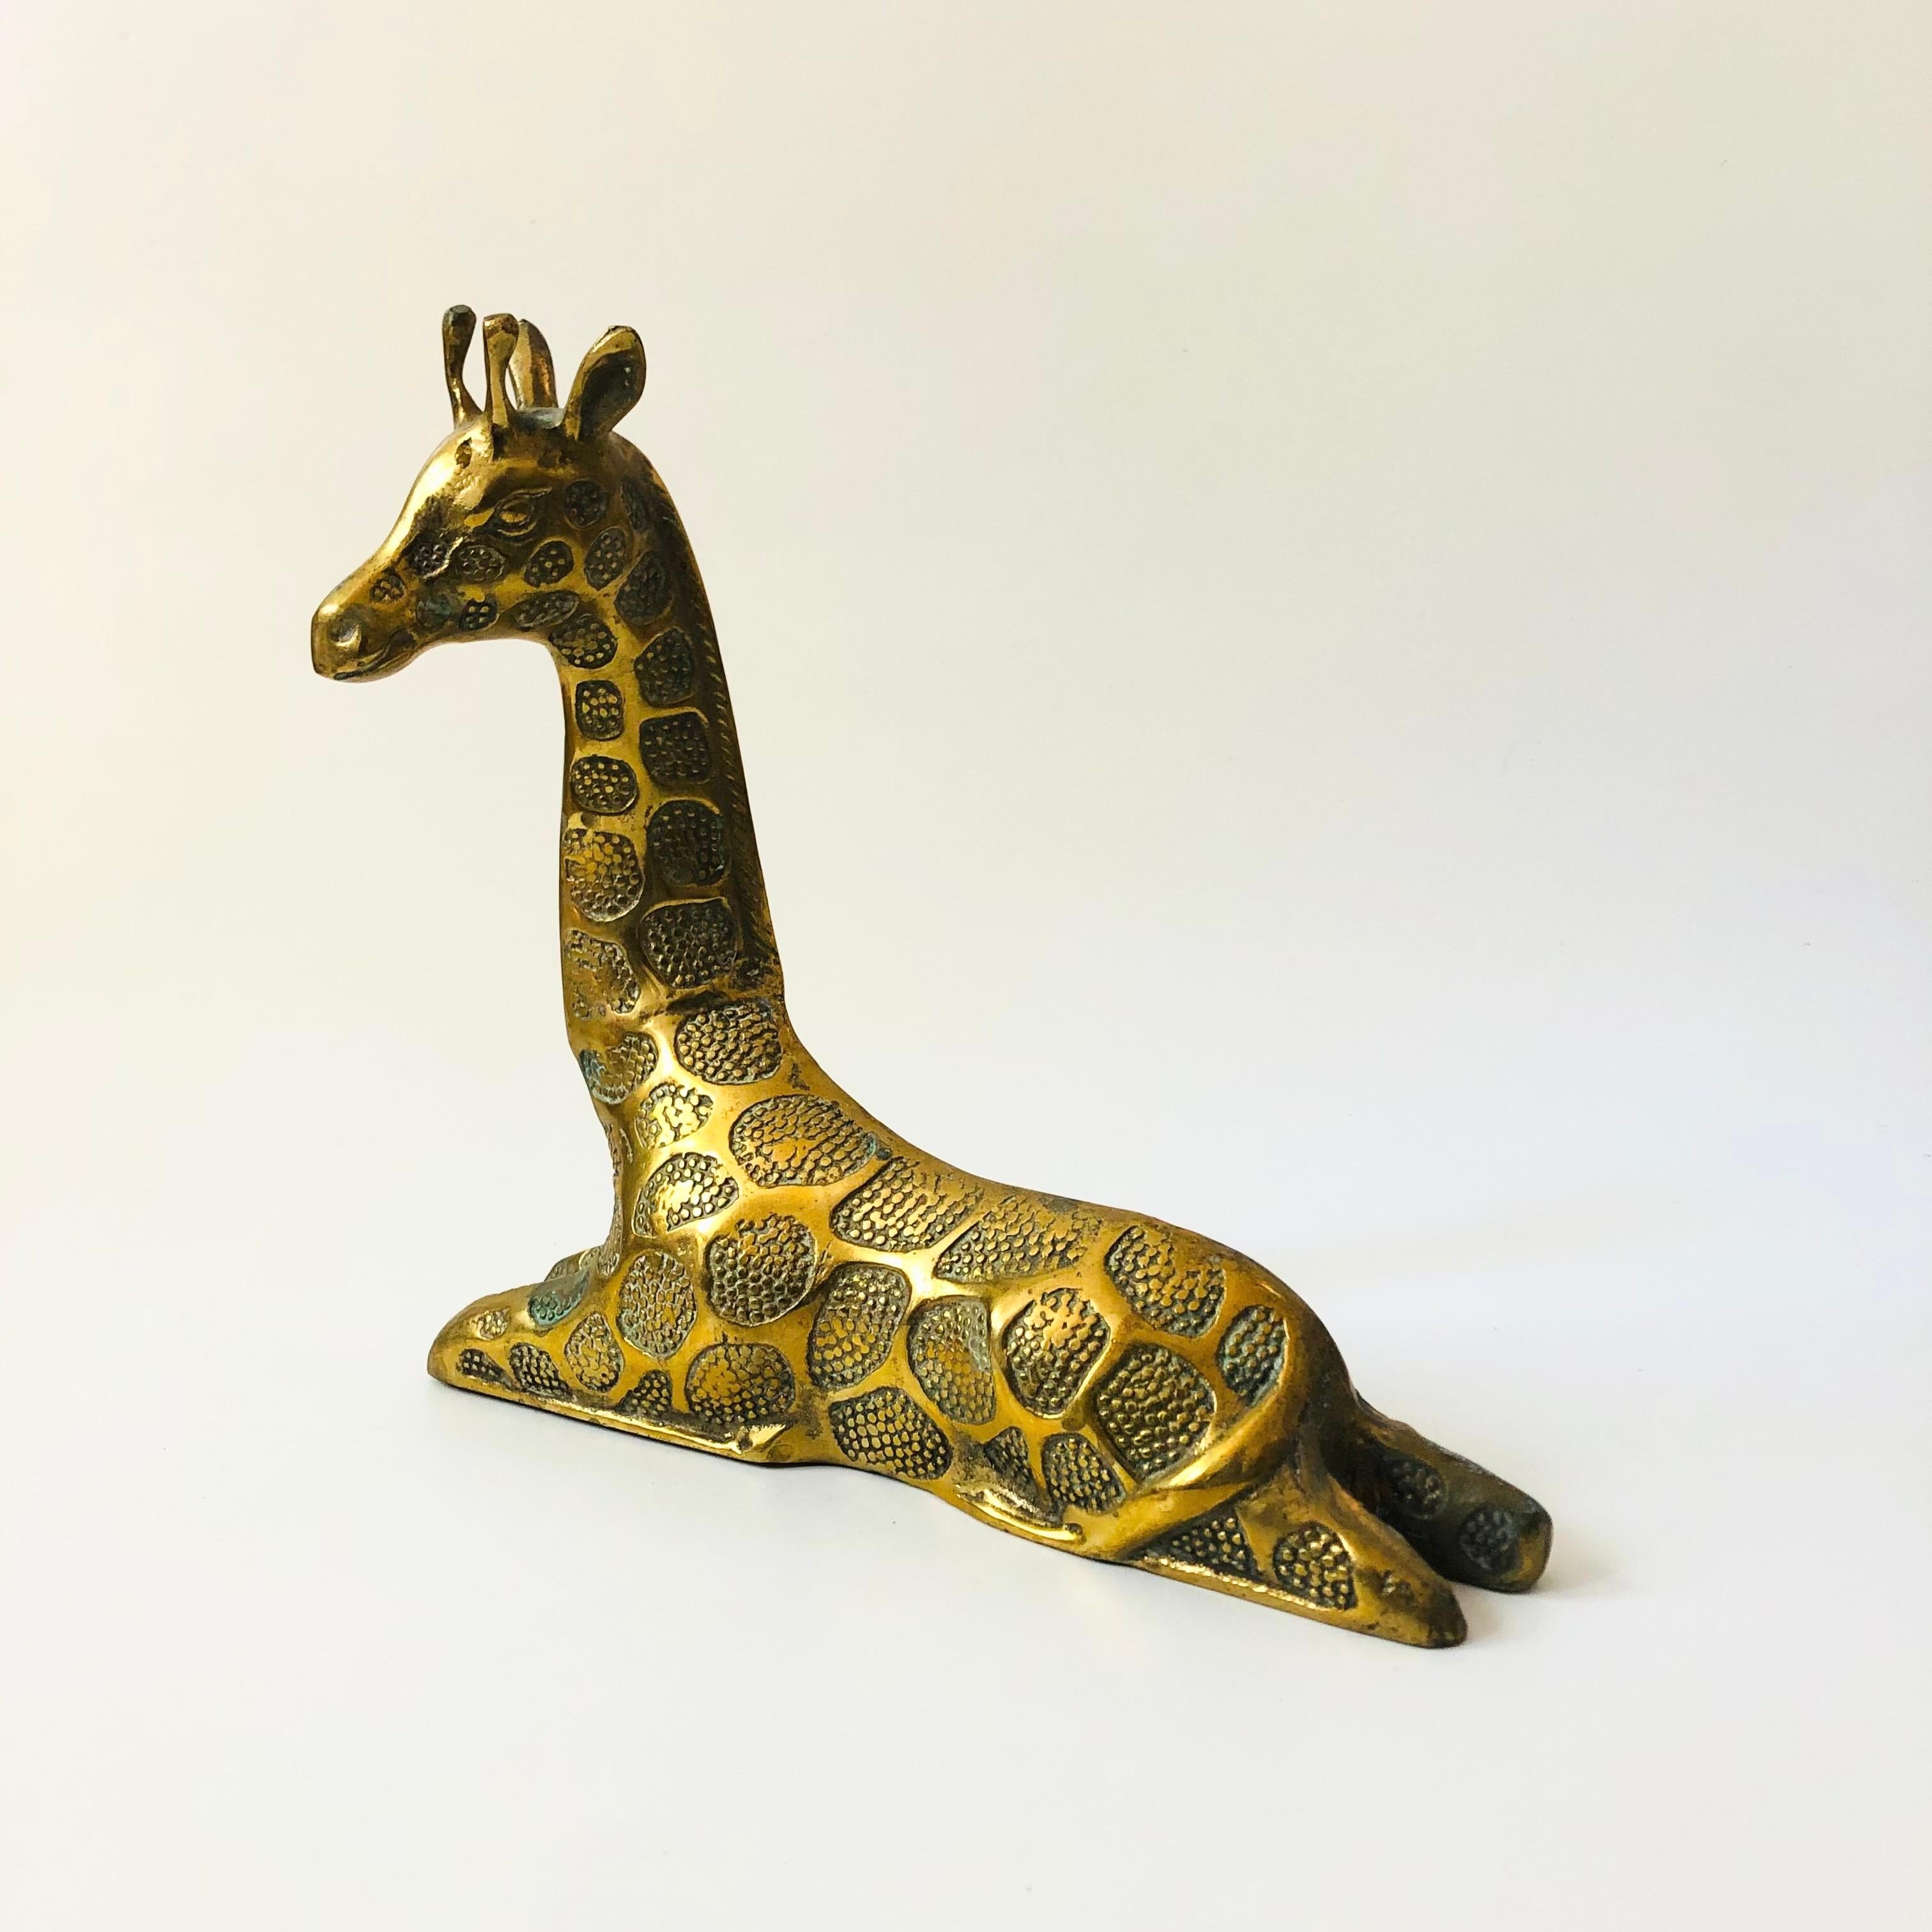 A large vintage brass giraffe in a laying down position. Beautiful realistic detailing formed into the brass, a unique large statement piece. Made in Korea.

